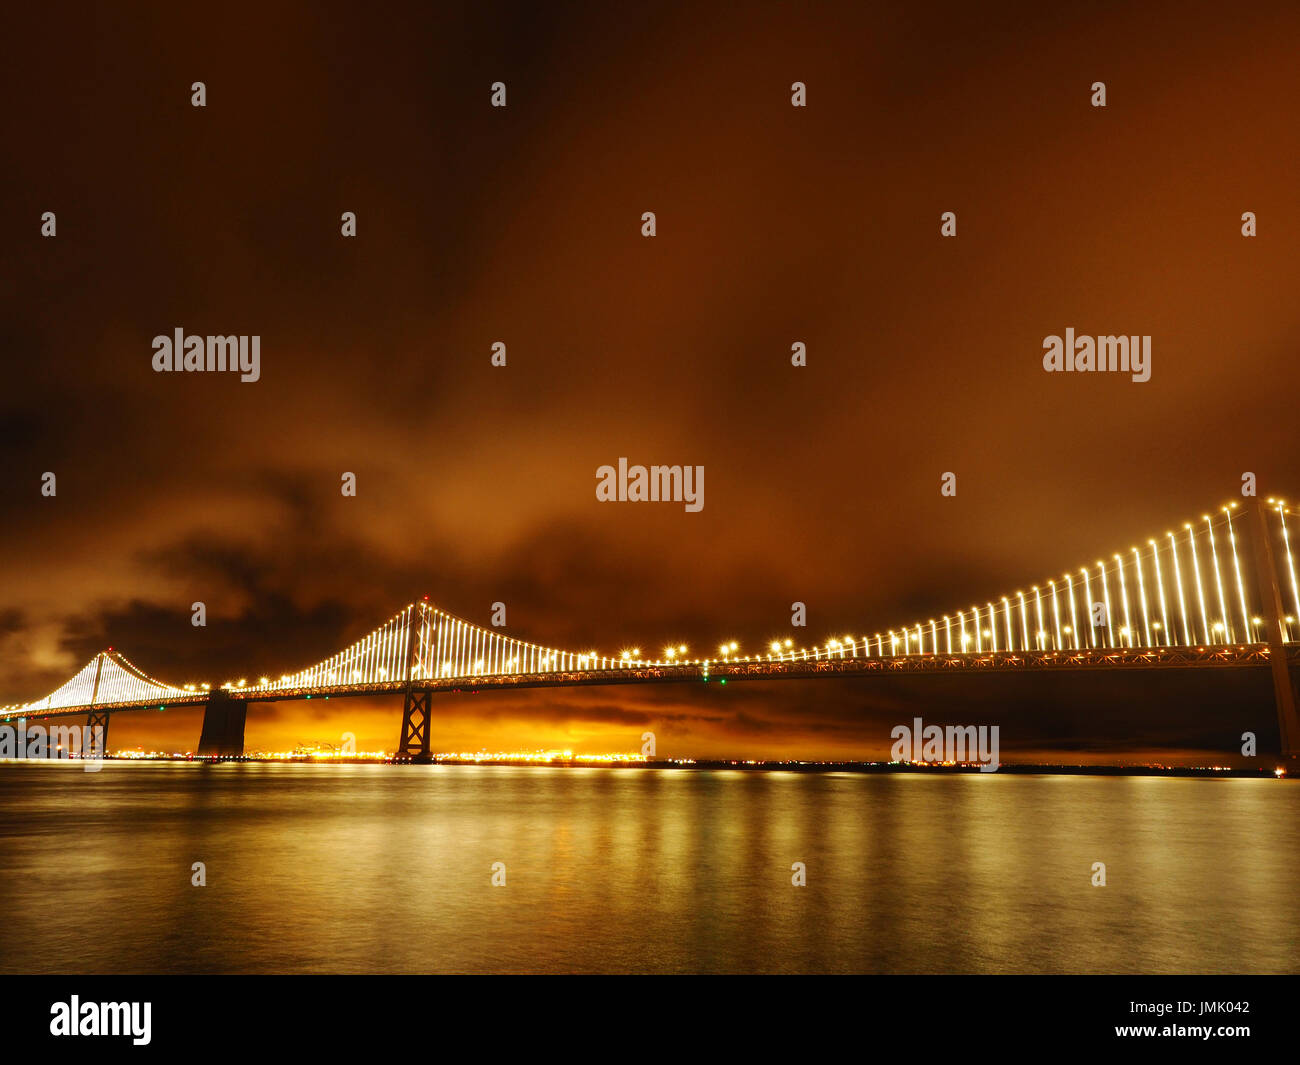 New Bay Bridge at Night as Seen from the Embarcadero with Lights Reflected off of the Bay and Illuminated Clouds, San Francisco, California, USA Stock Photo